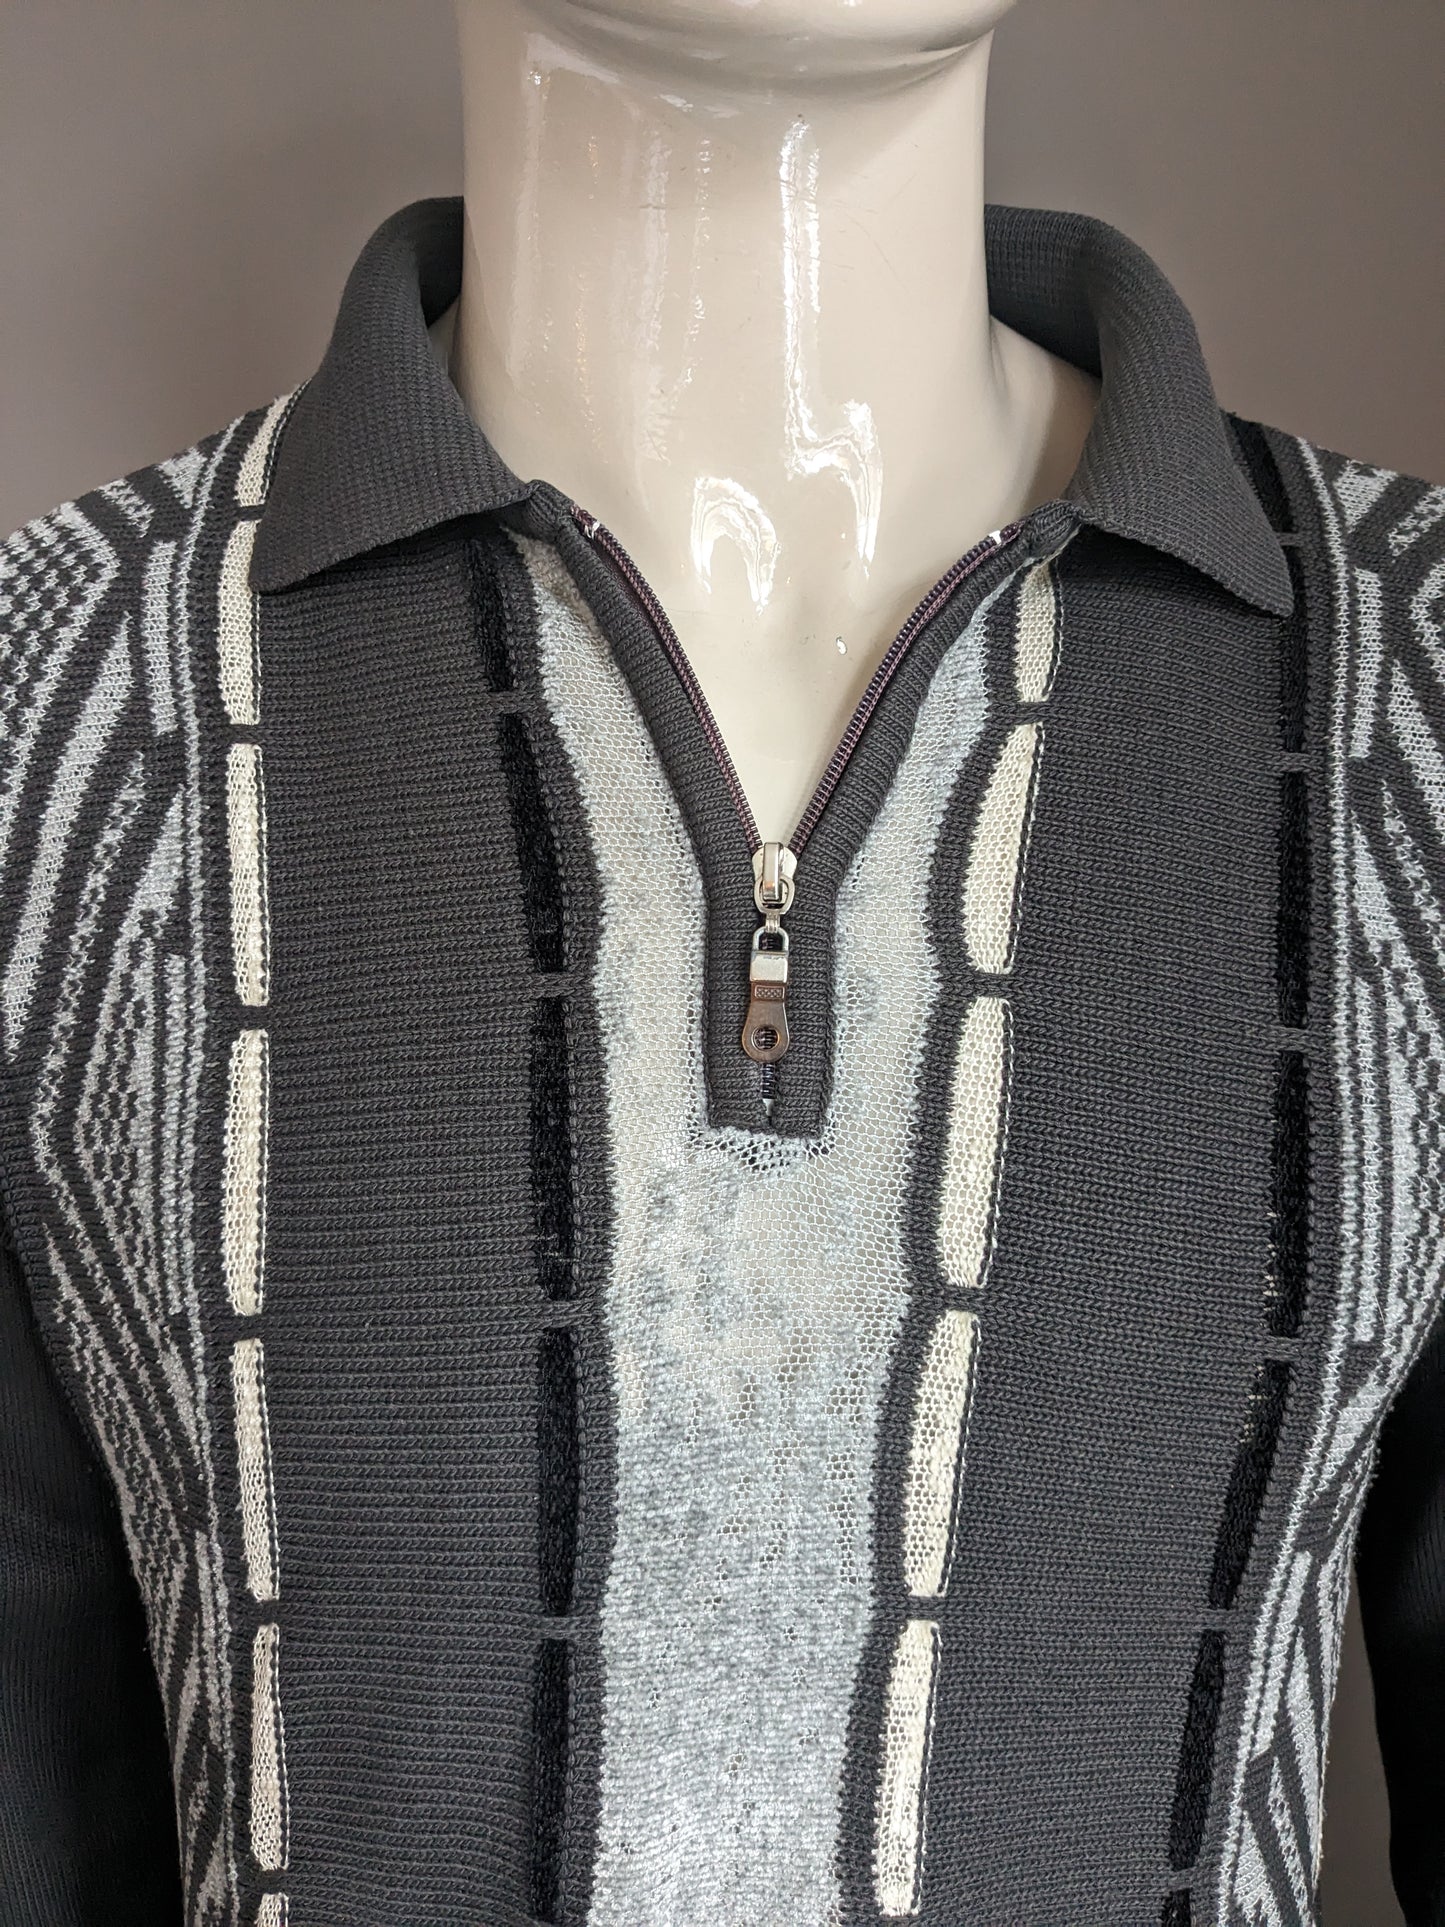 Vintage Sonne Sweater with zipper. Gray beige black colored. Size L.